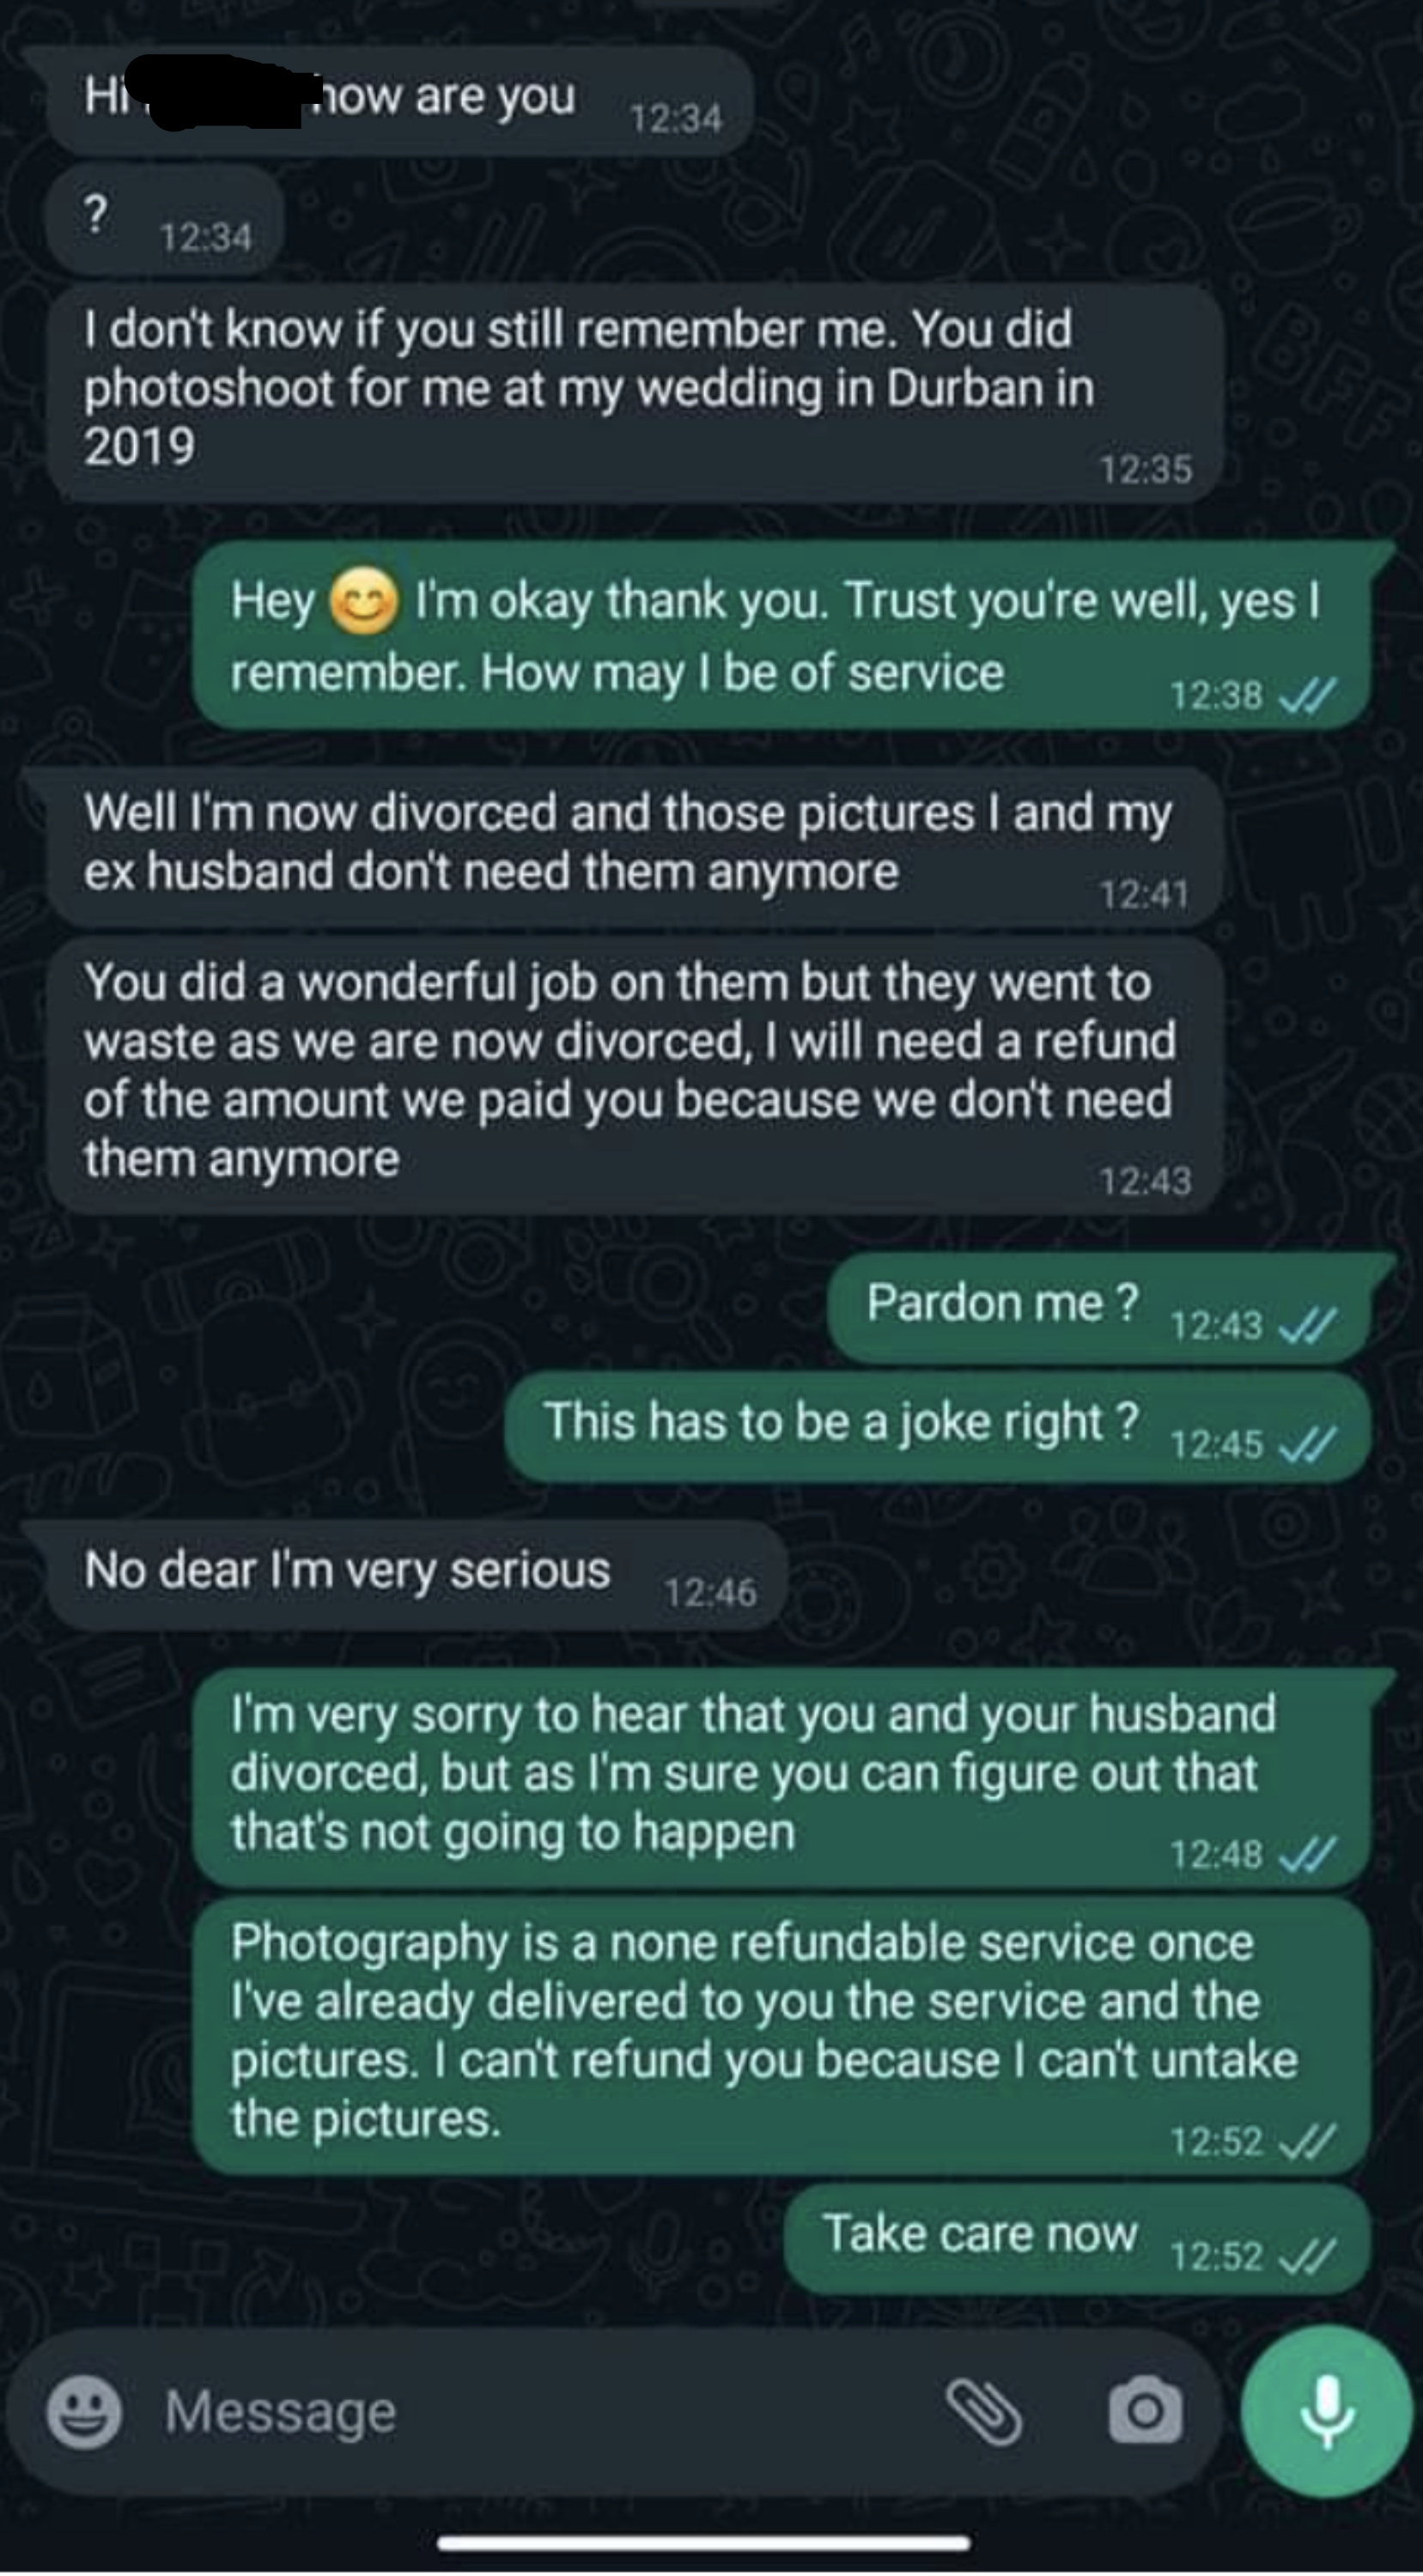 message to get a refund after the divorce